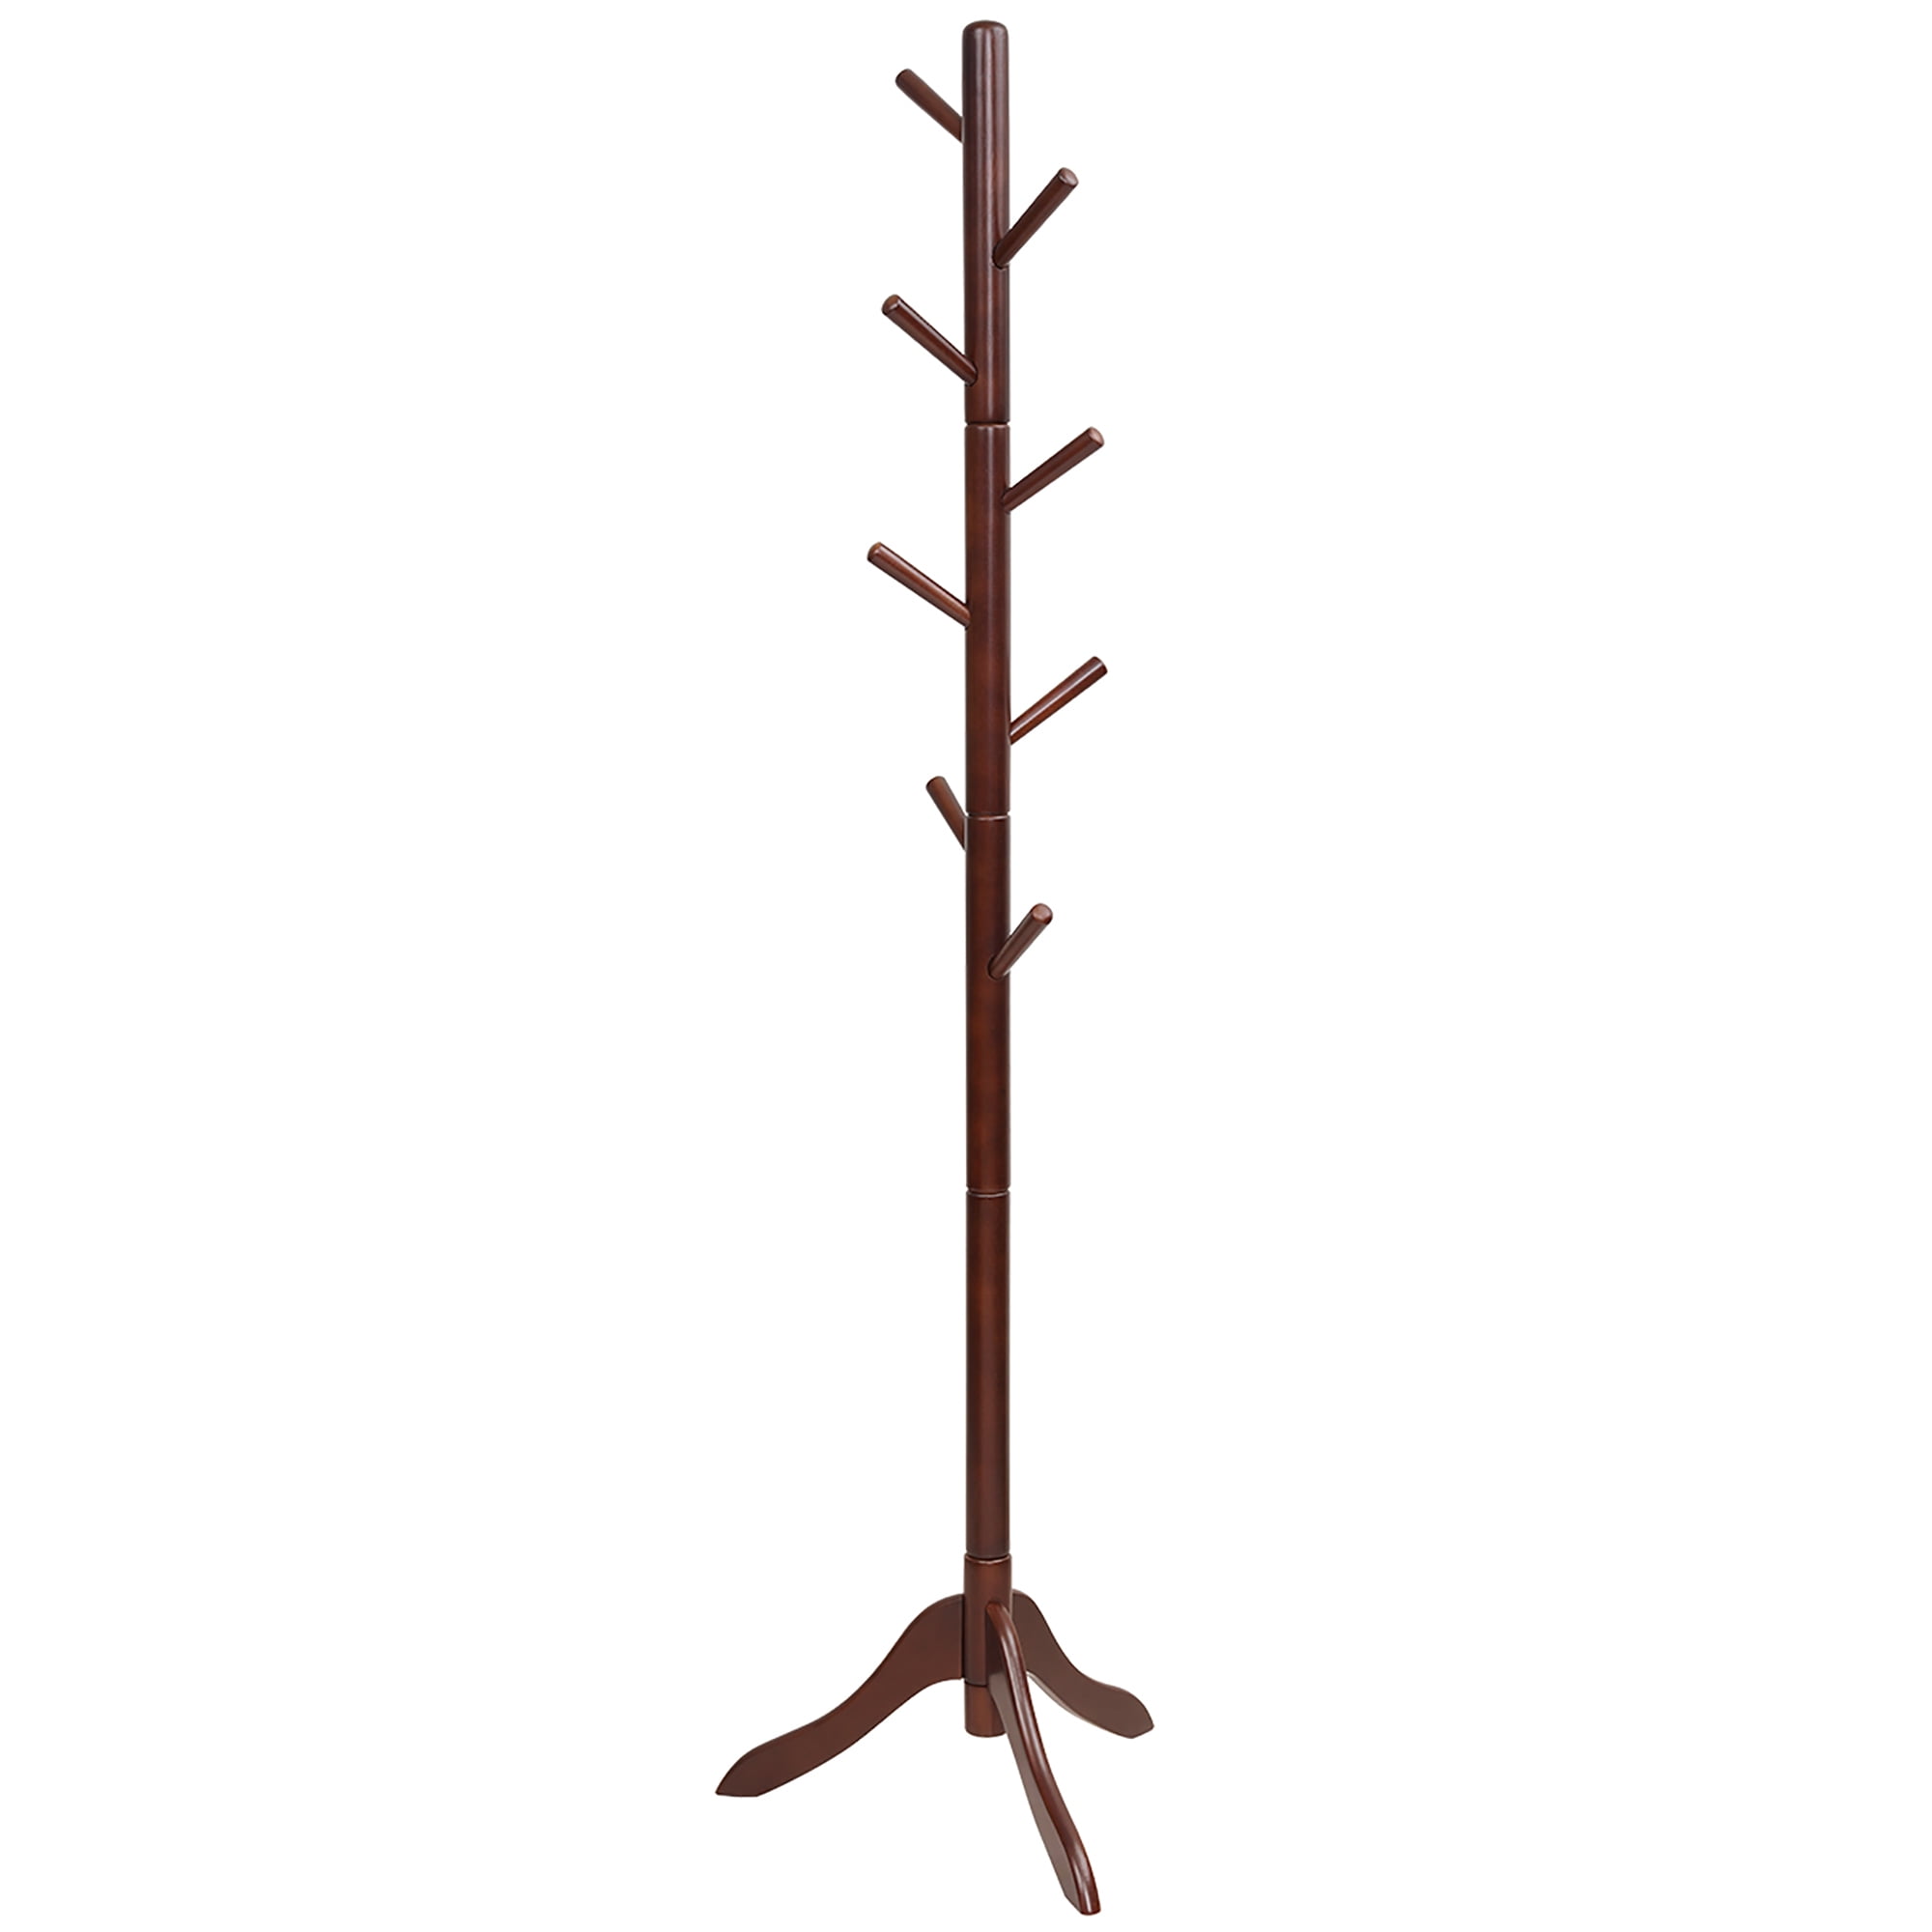 Costway Wooden Coat Rack Stand Entryway Hall Tree 2 Adjustable Height w 8 Hooks Brown 3e429956 16d7 4a29 afab 360c47706db8.bb3959eaf39828c8c9470c3c596ad459